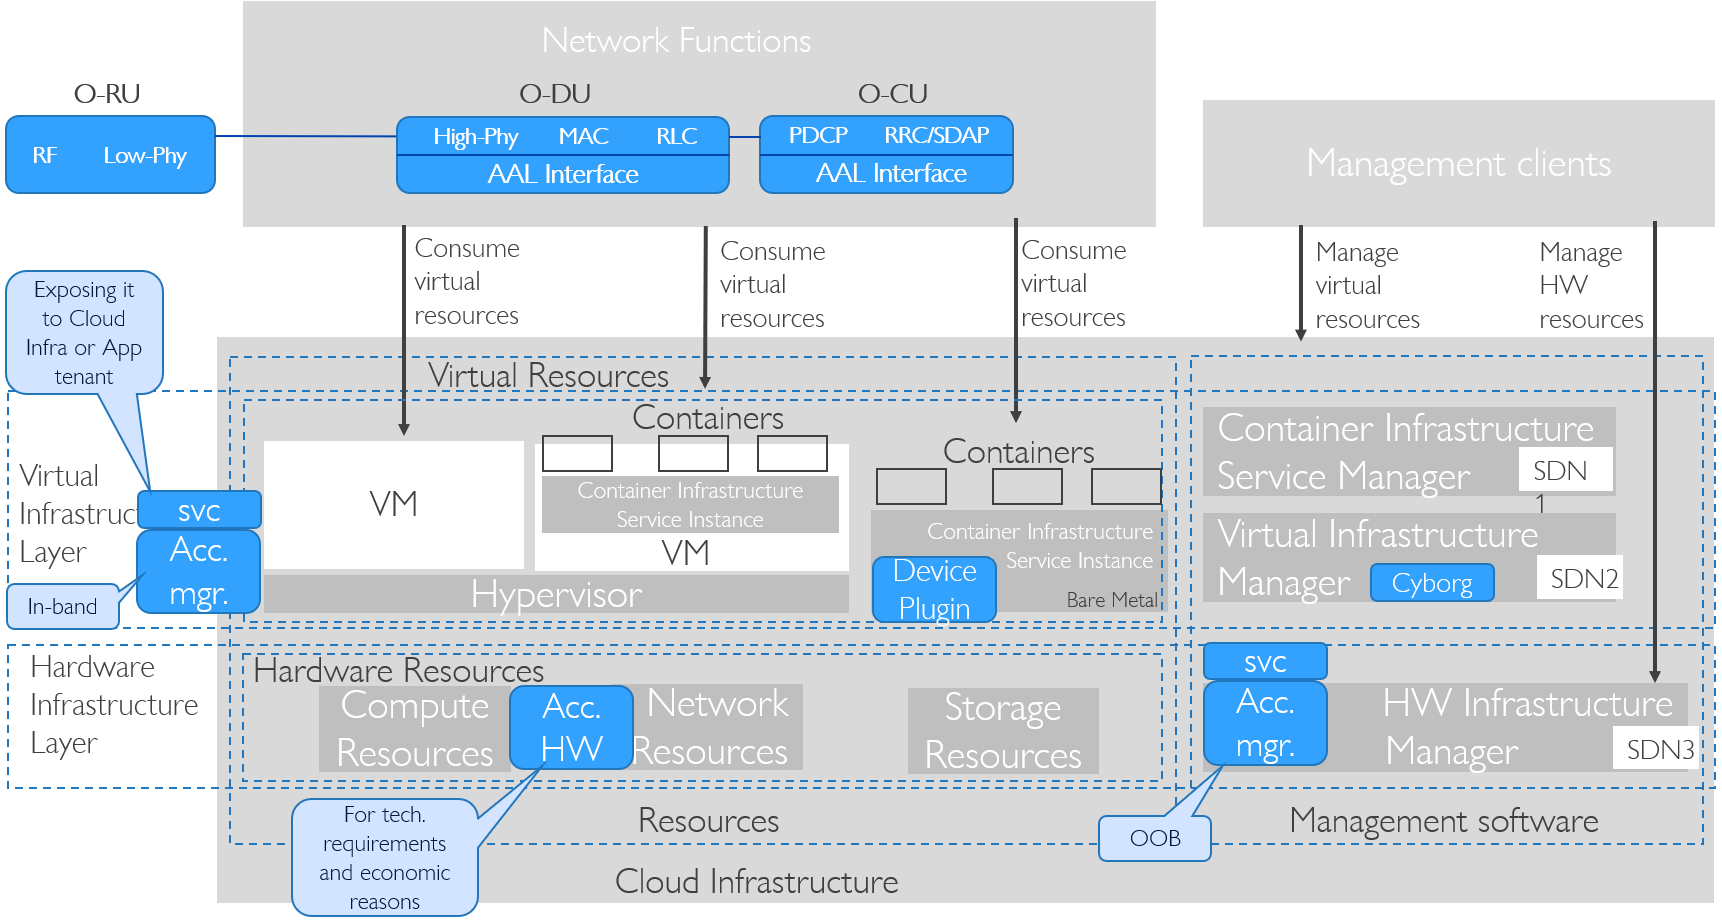 "Figure 3-24: AAL Interface in RM Realization Diagram"